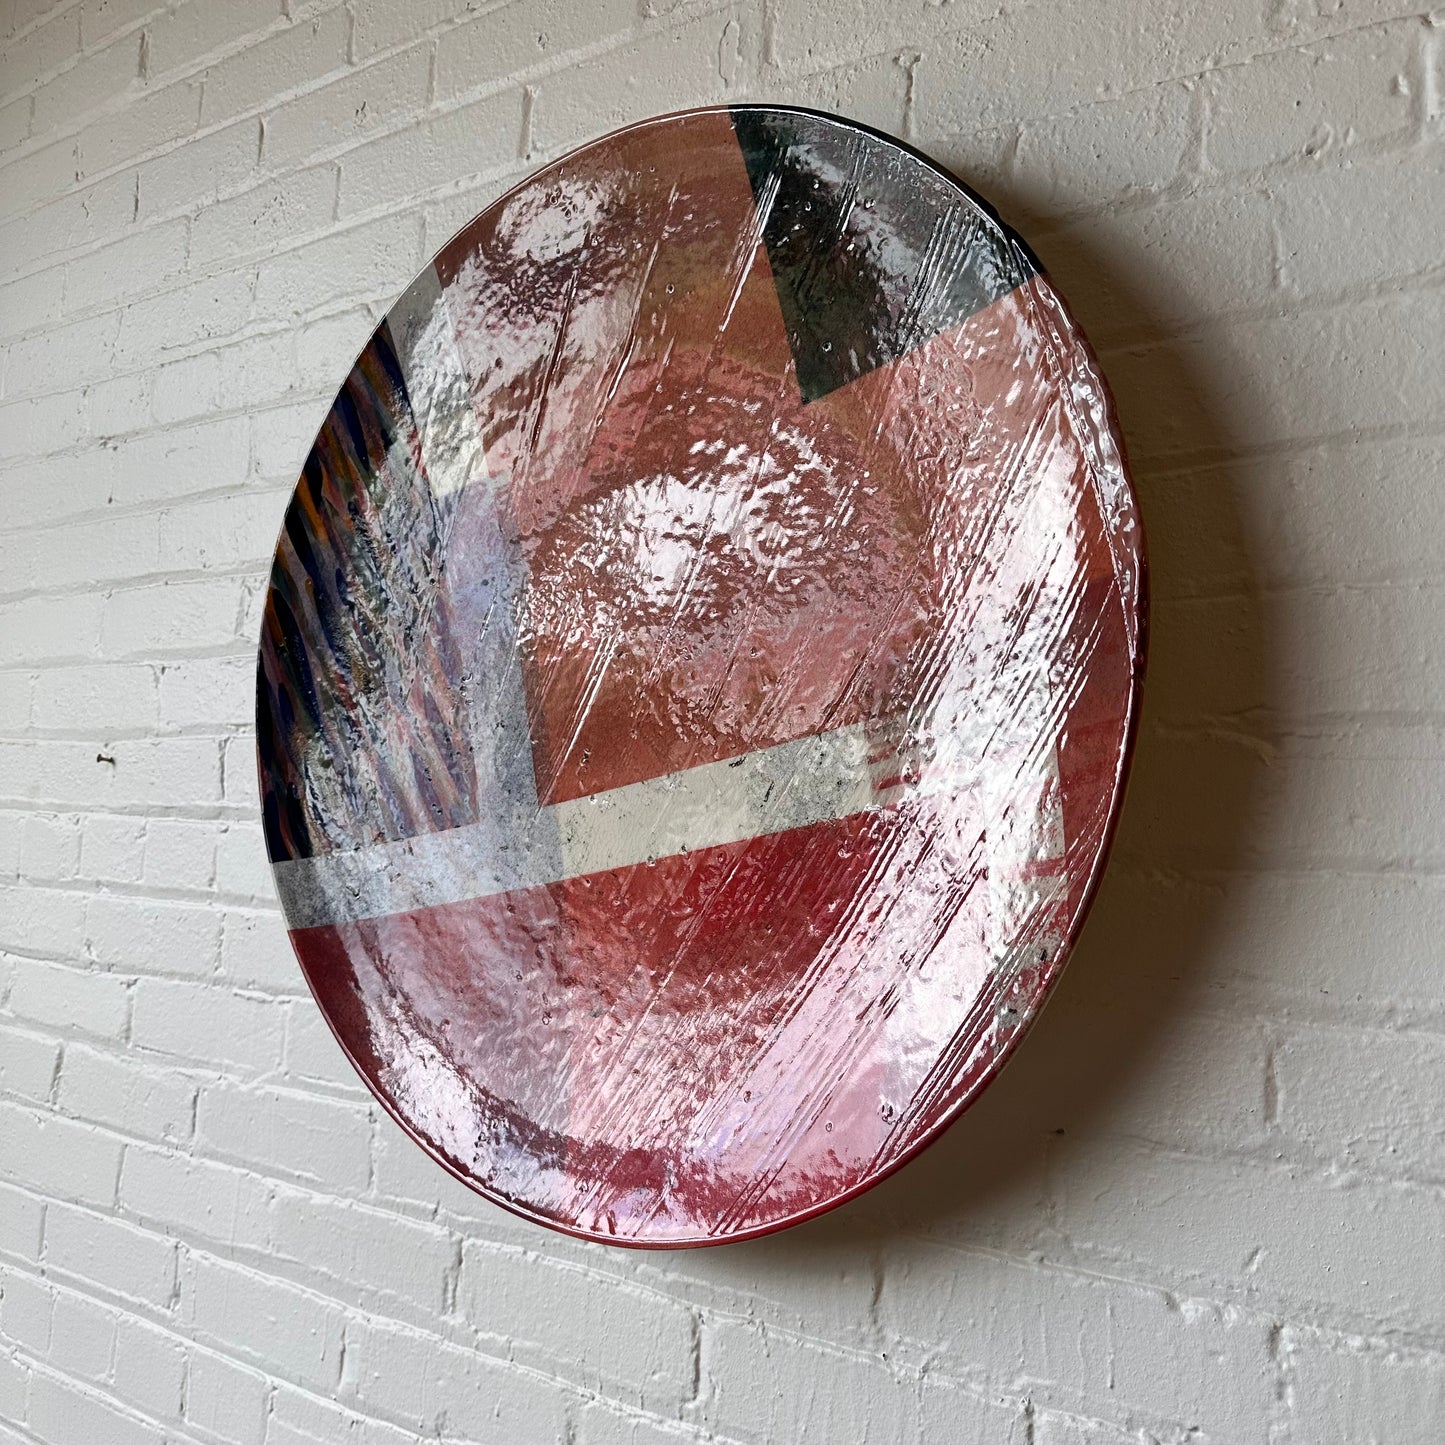 ABSTRACT CERAMIC ART PLATE BY DOUGLAS KENNEY